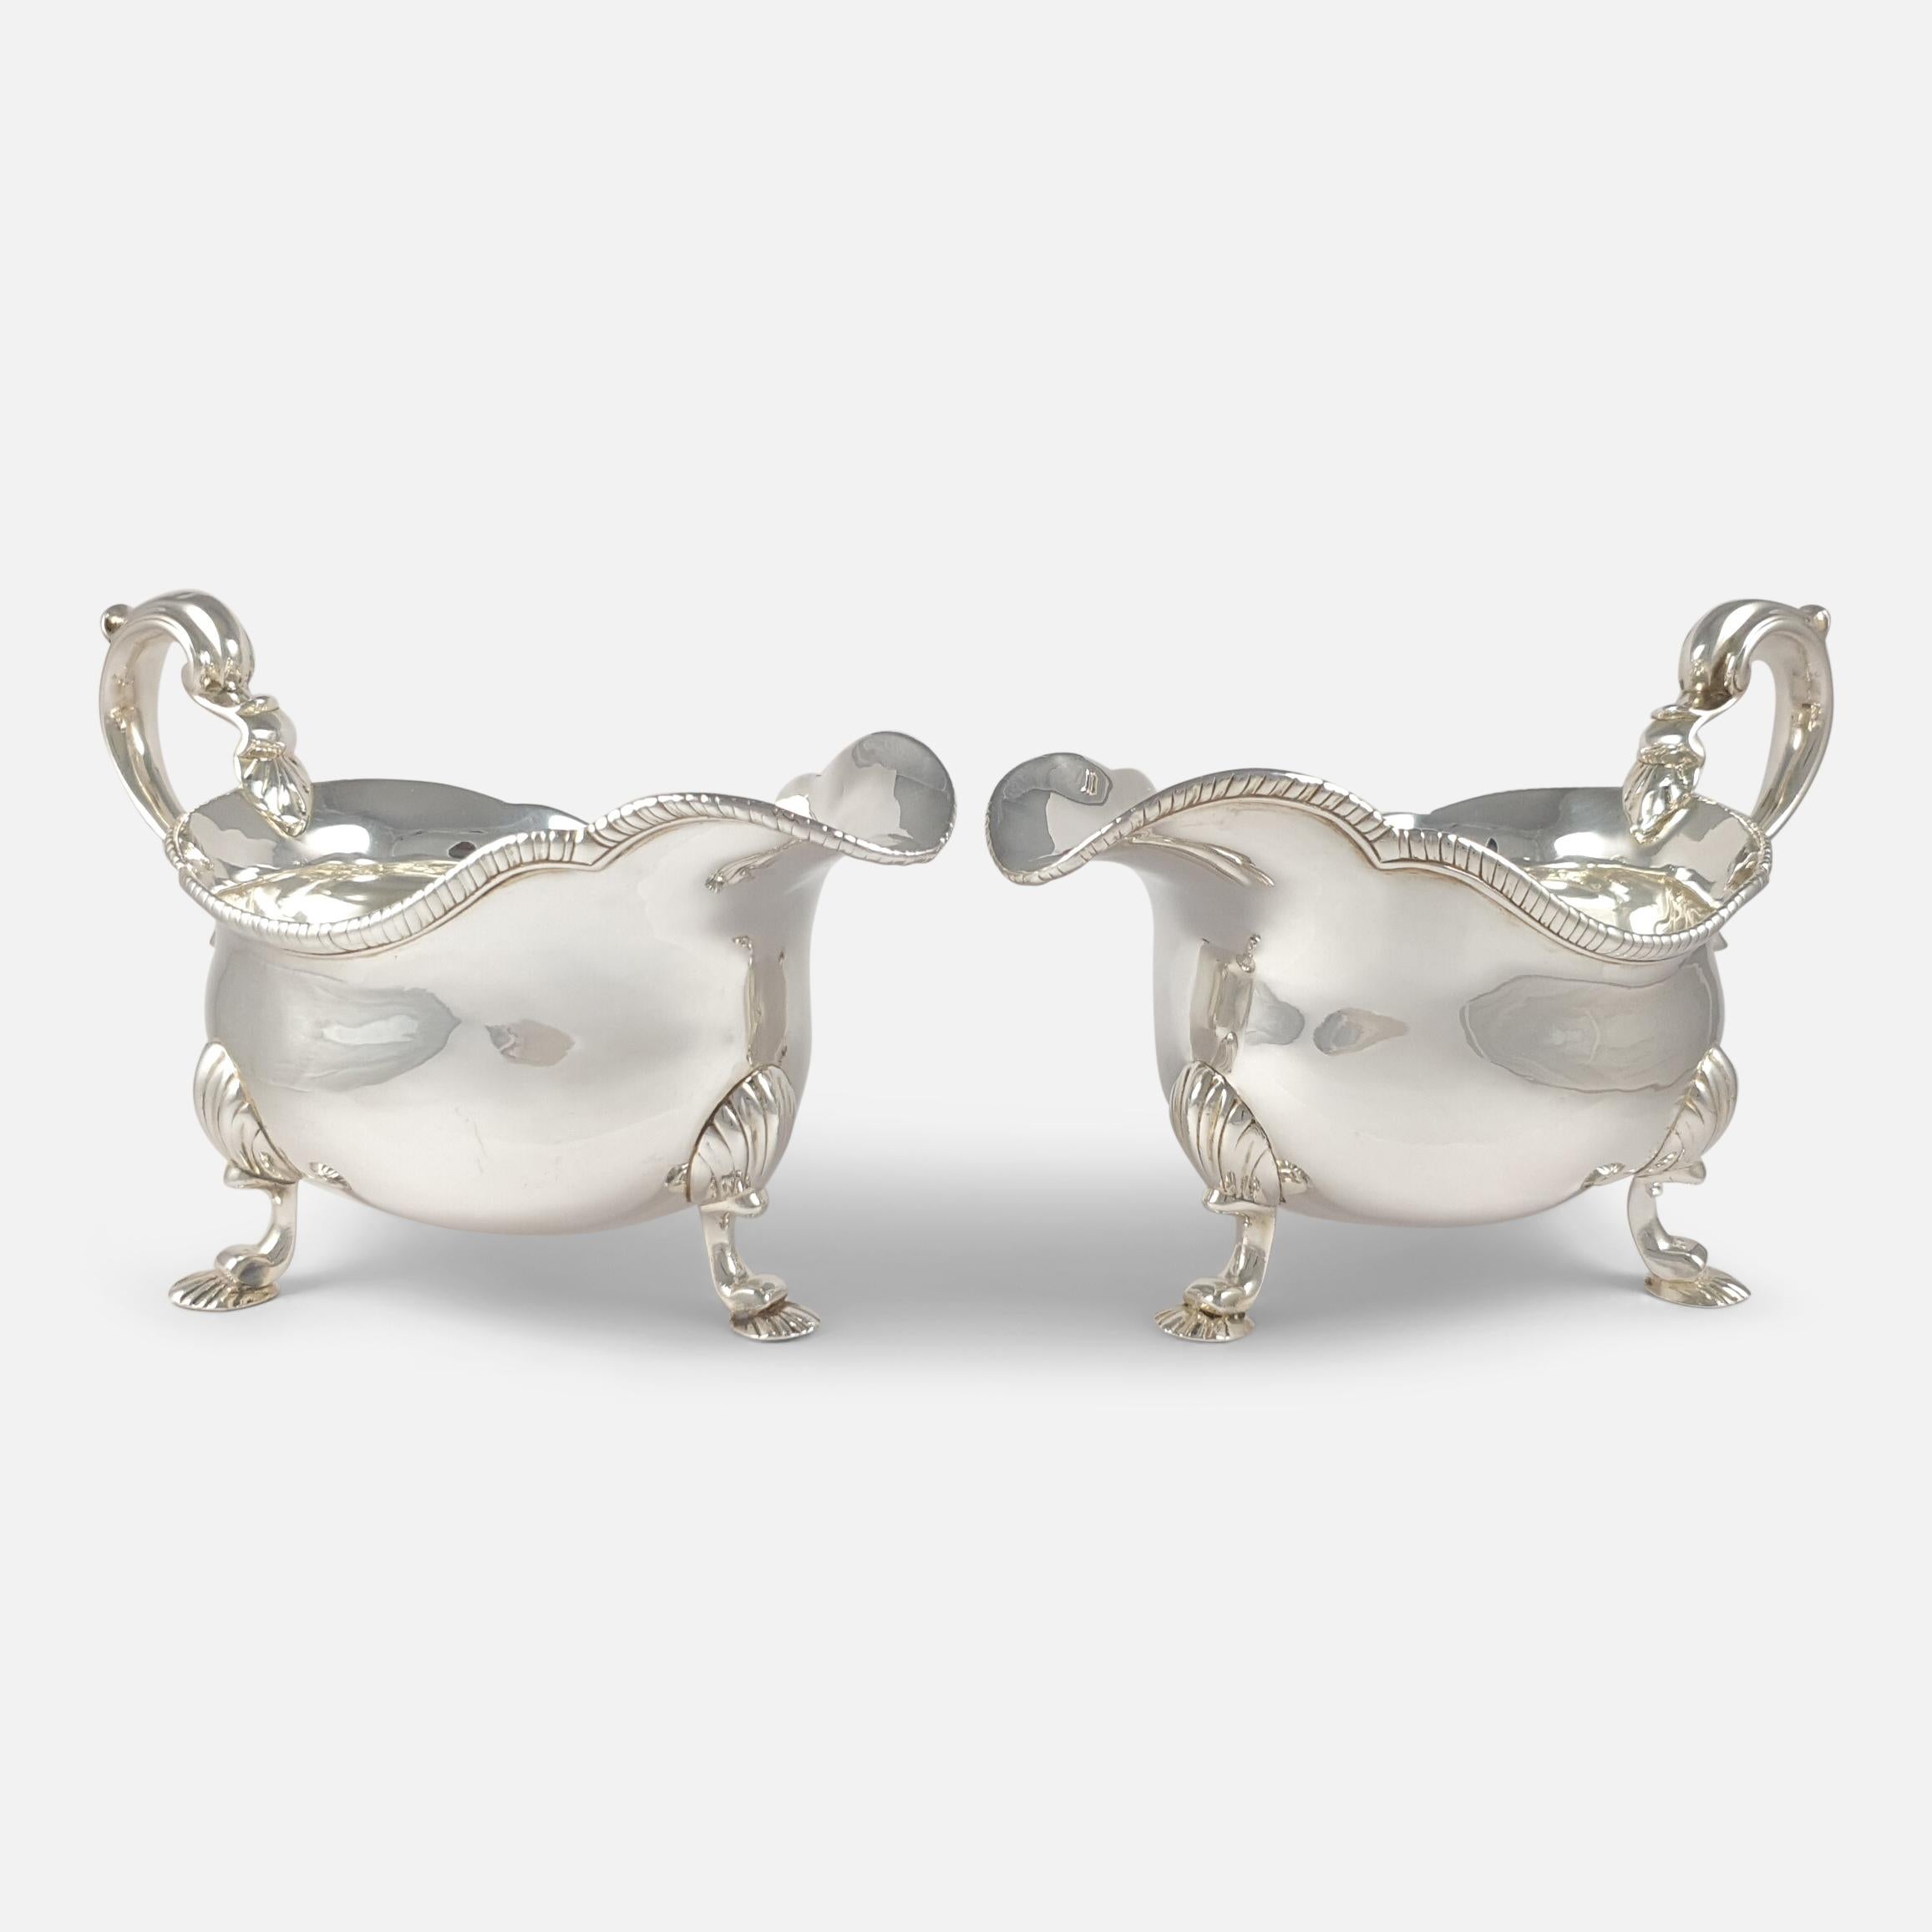 Pair of Victorian Silver Sauce Boats, D and C Houle, 1841, 1039.7 grams For Sale 5